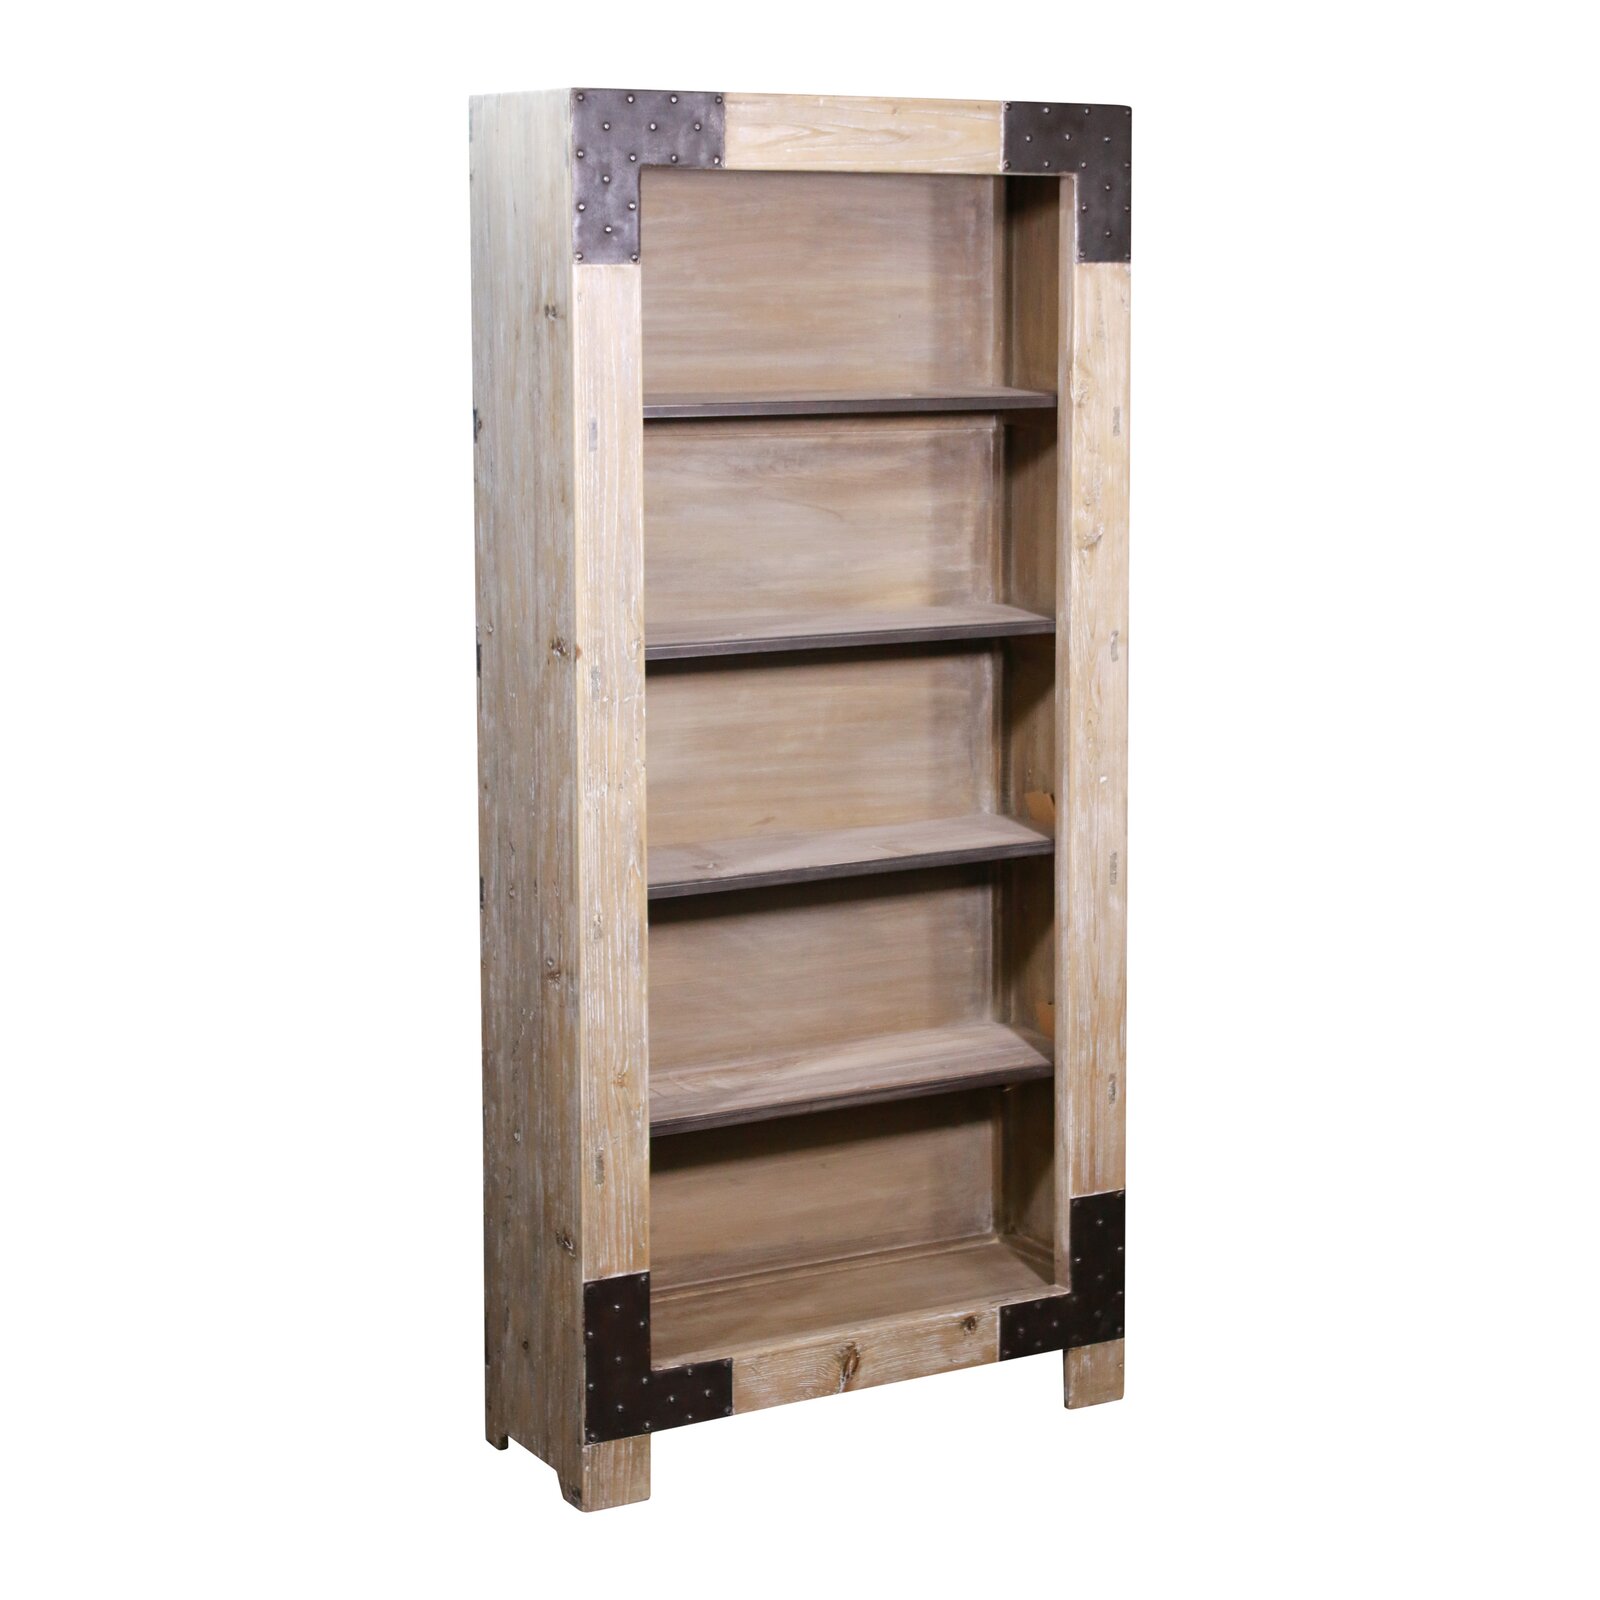 Lily's Living 85'' H x 40'' W Solid Wood Standard Bookcase